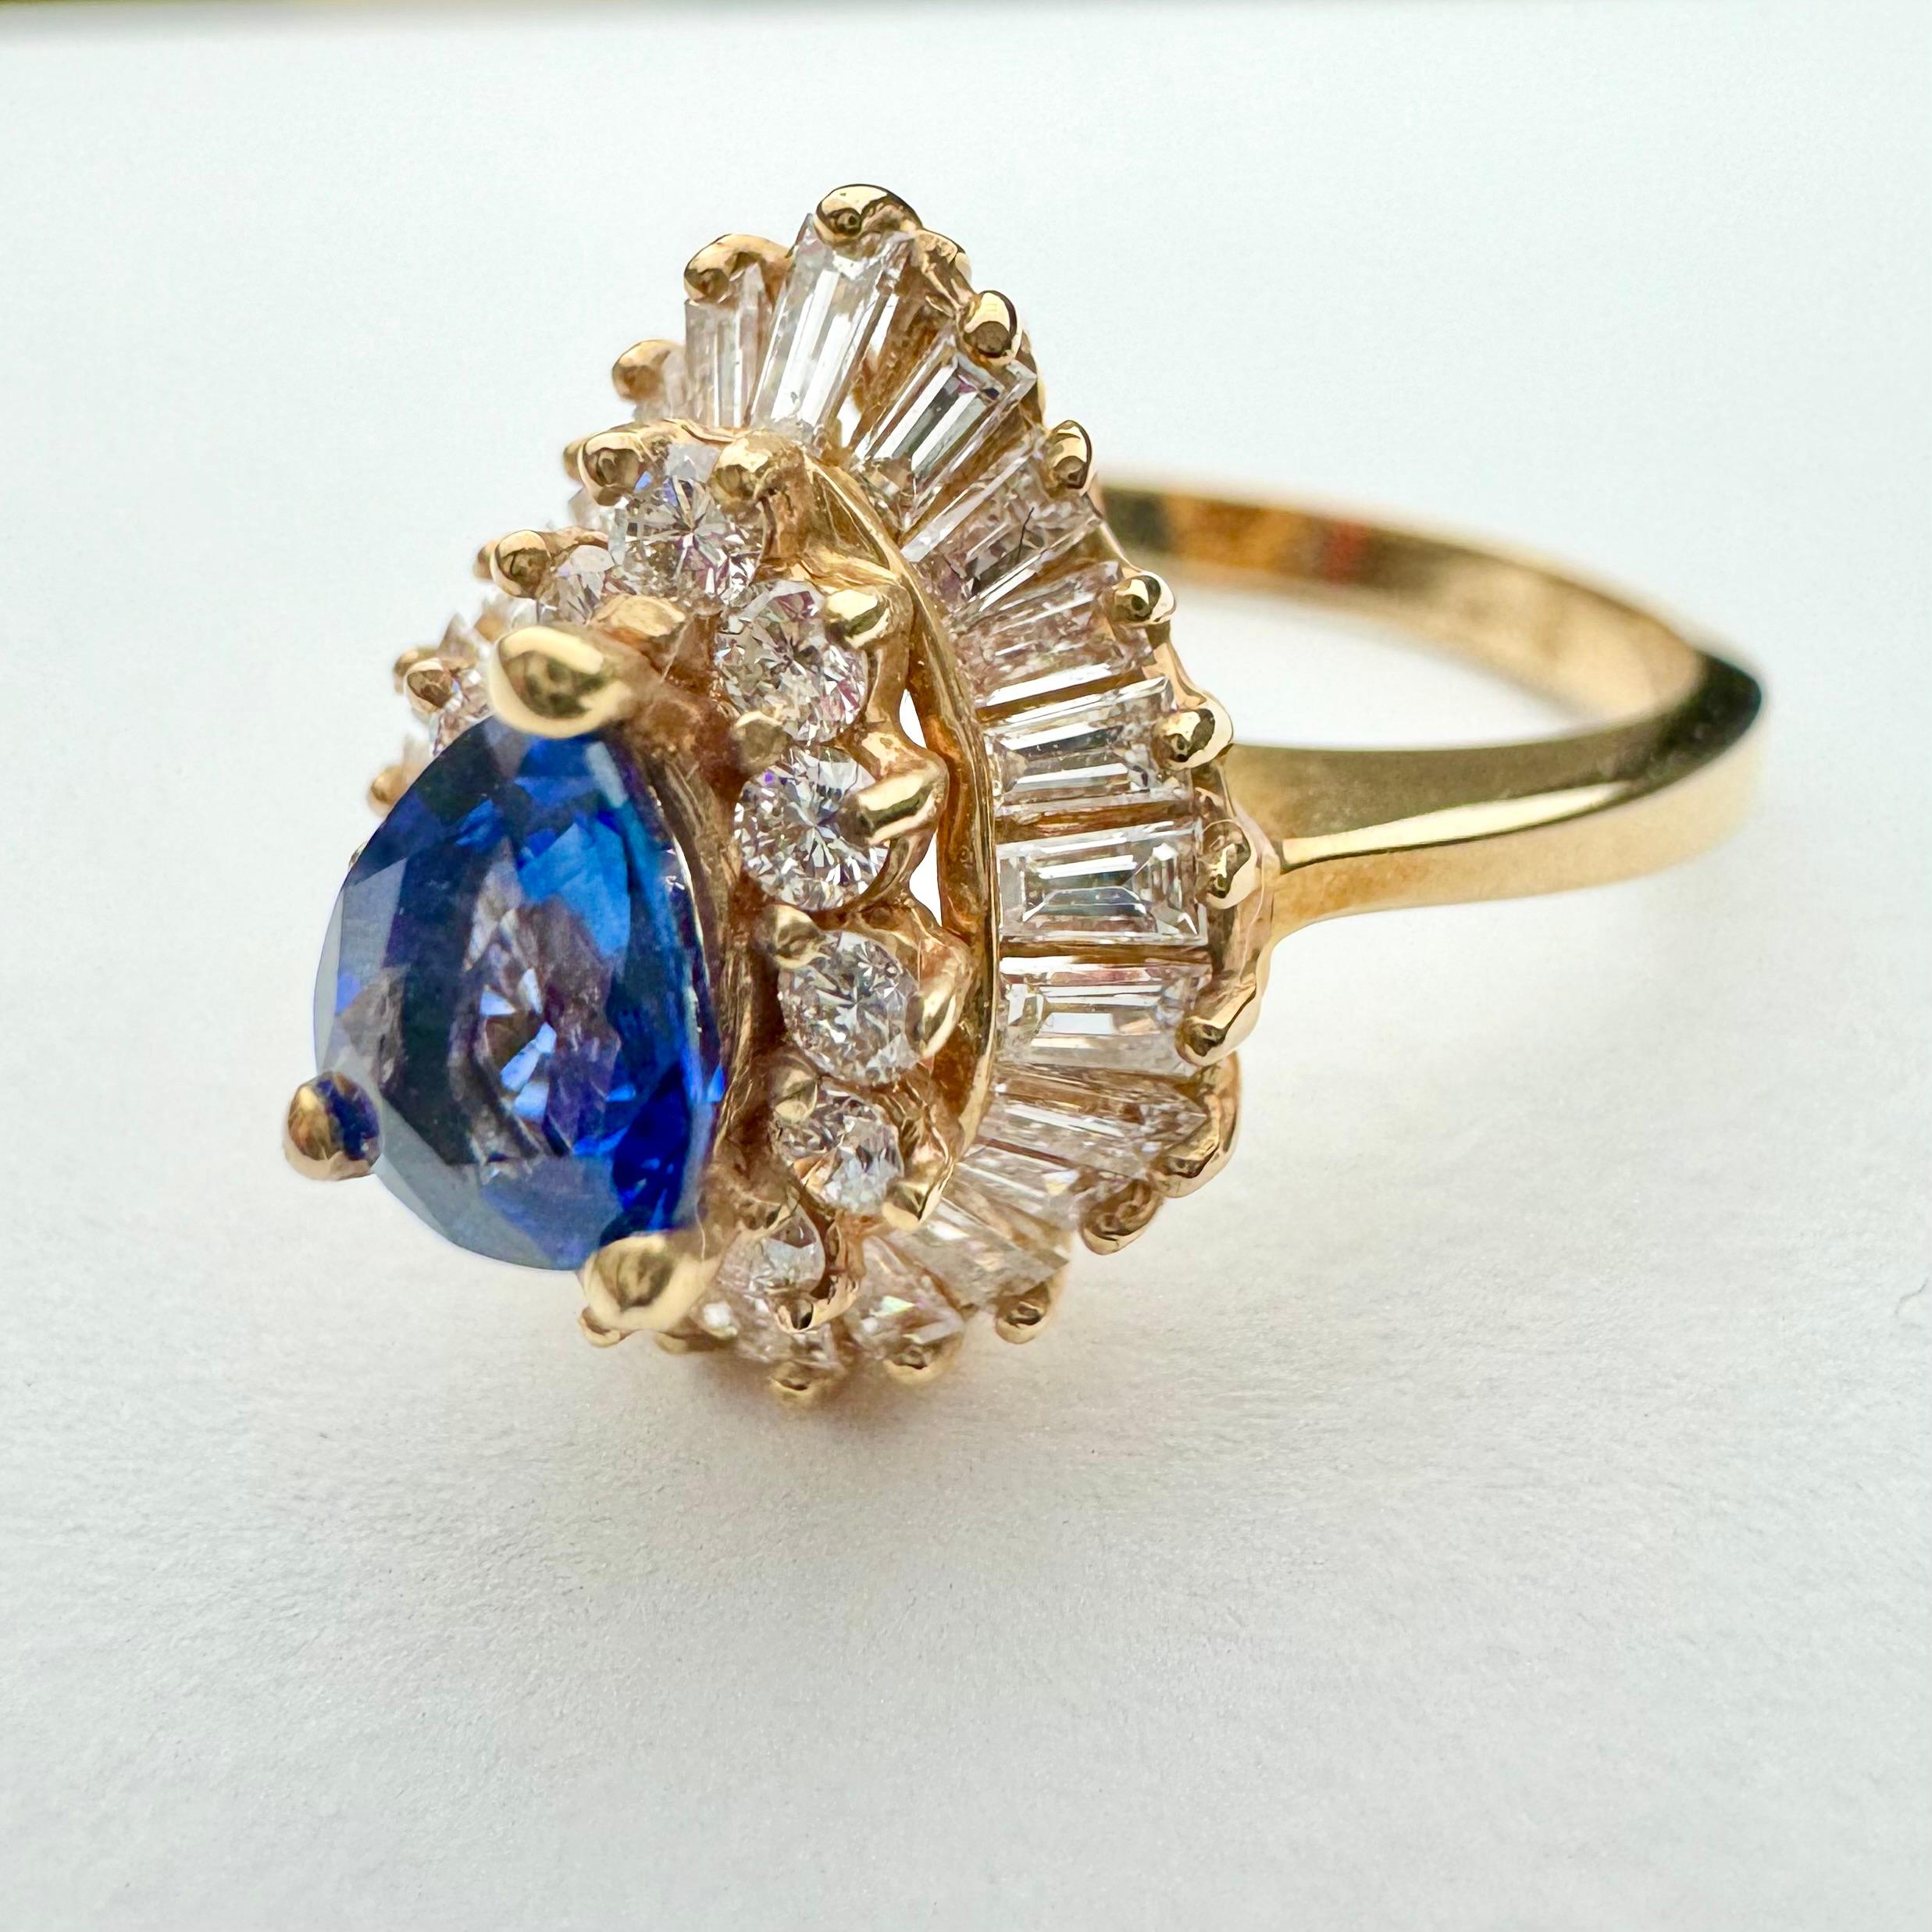 Women's Pear shaped Sapphire and Diamond Ring in 14k yellow gold For Sale